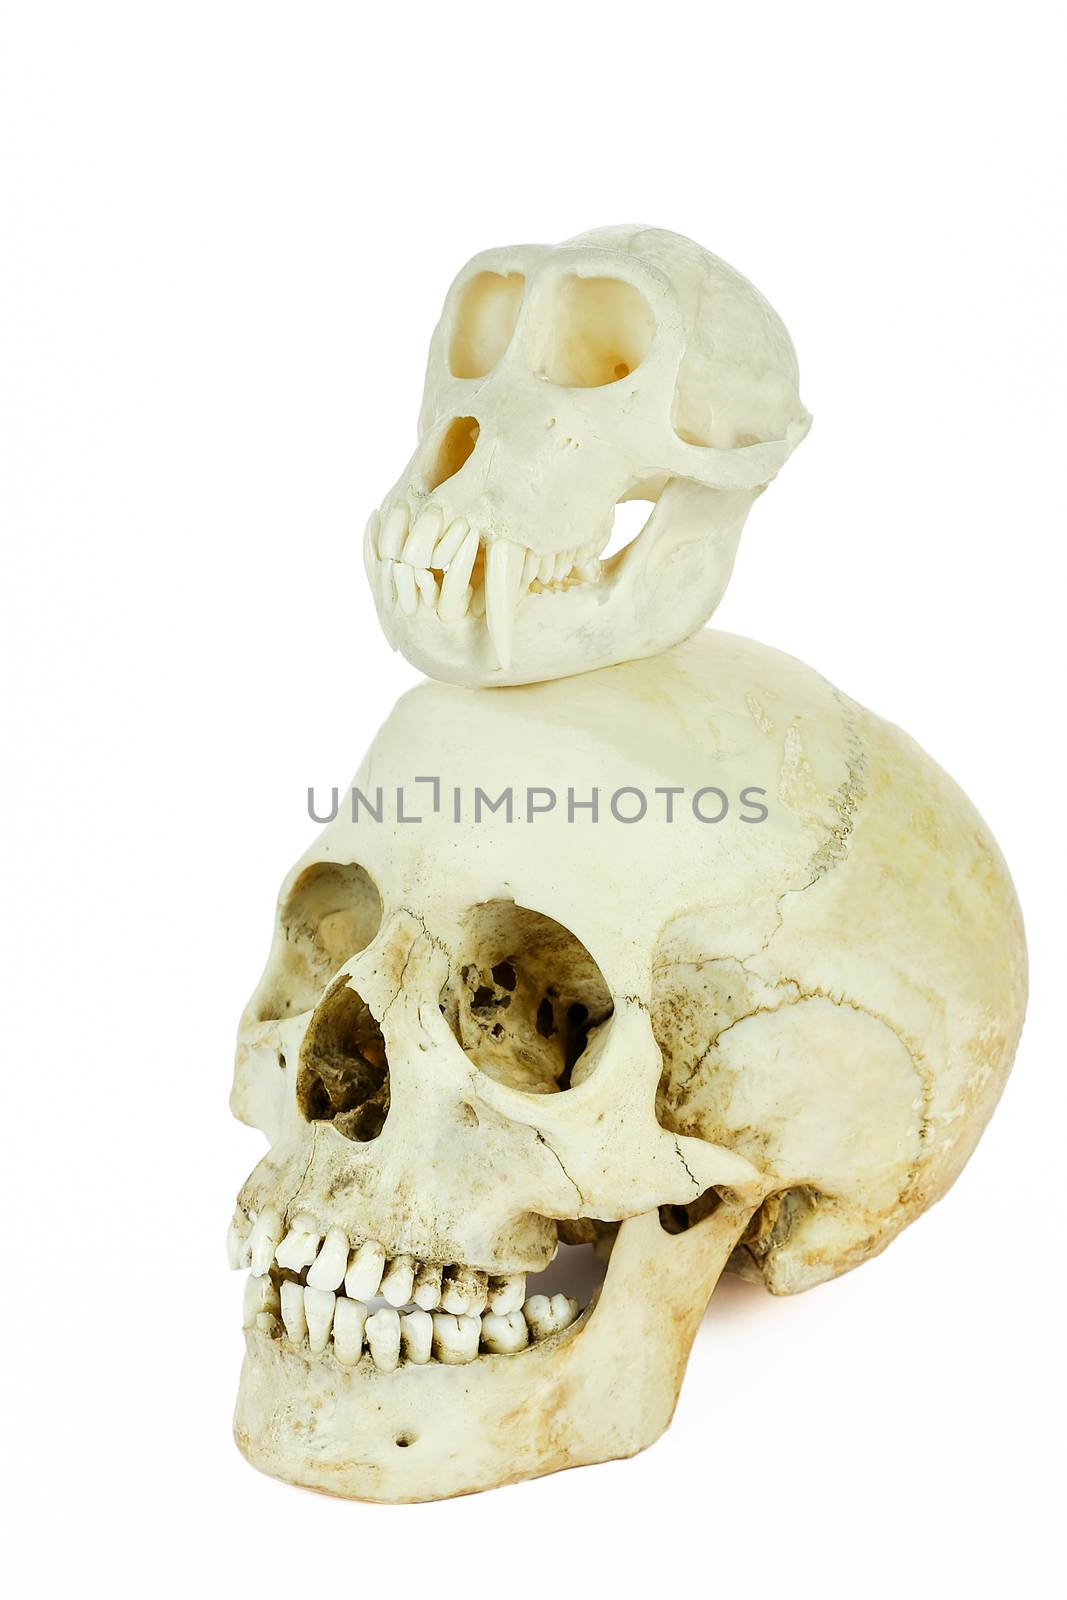 Skulls of human and ape on top of each other by BenSchonewille